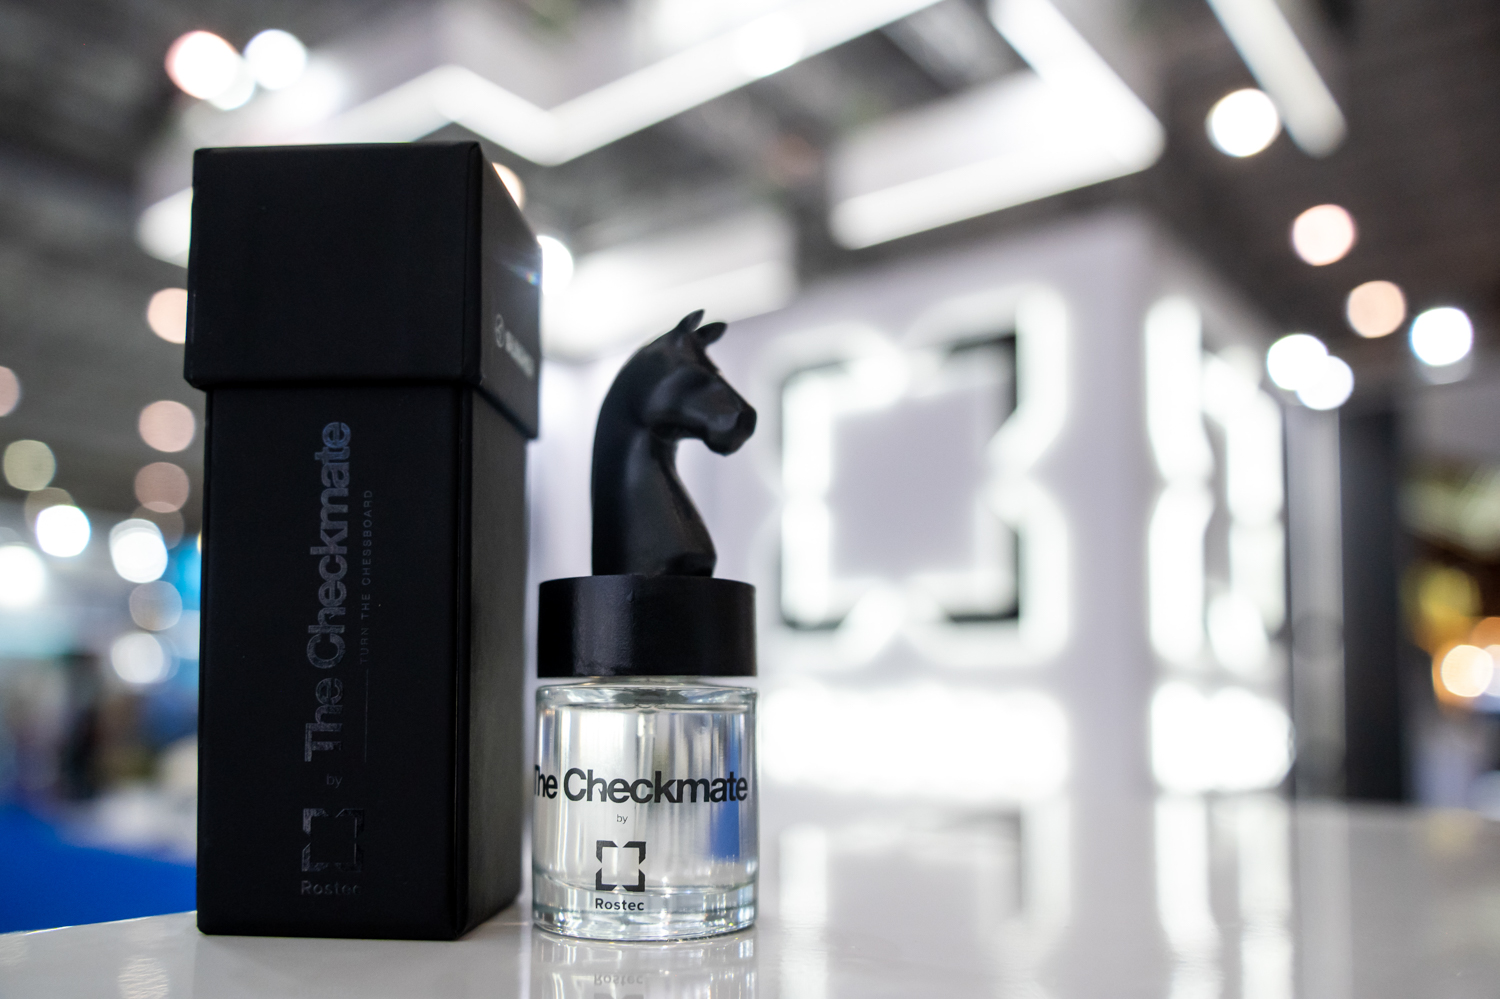 Checkmate Fighter Jet-Scented Perfume Created in Russia